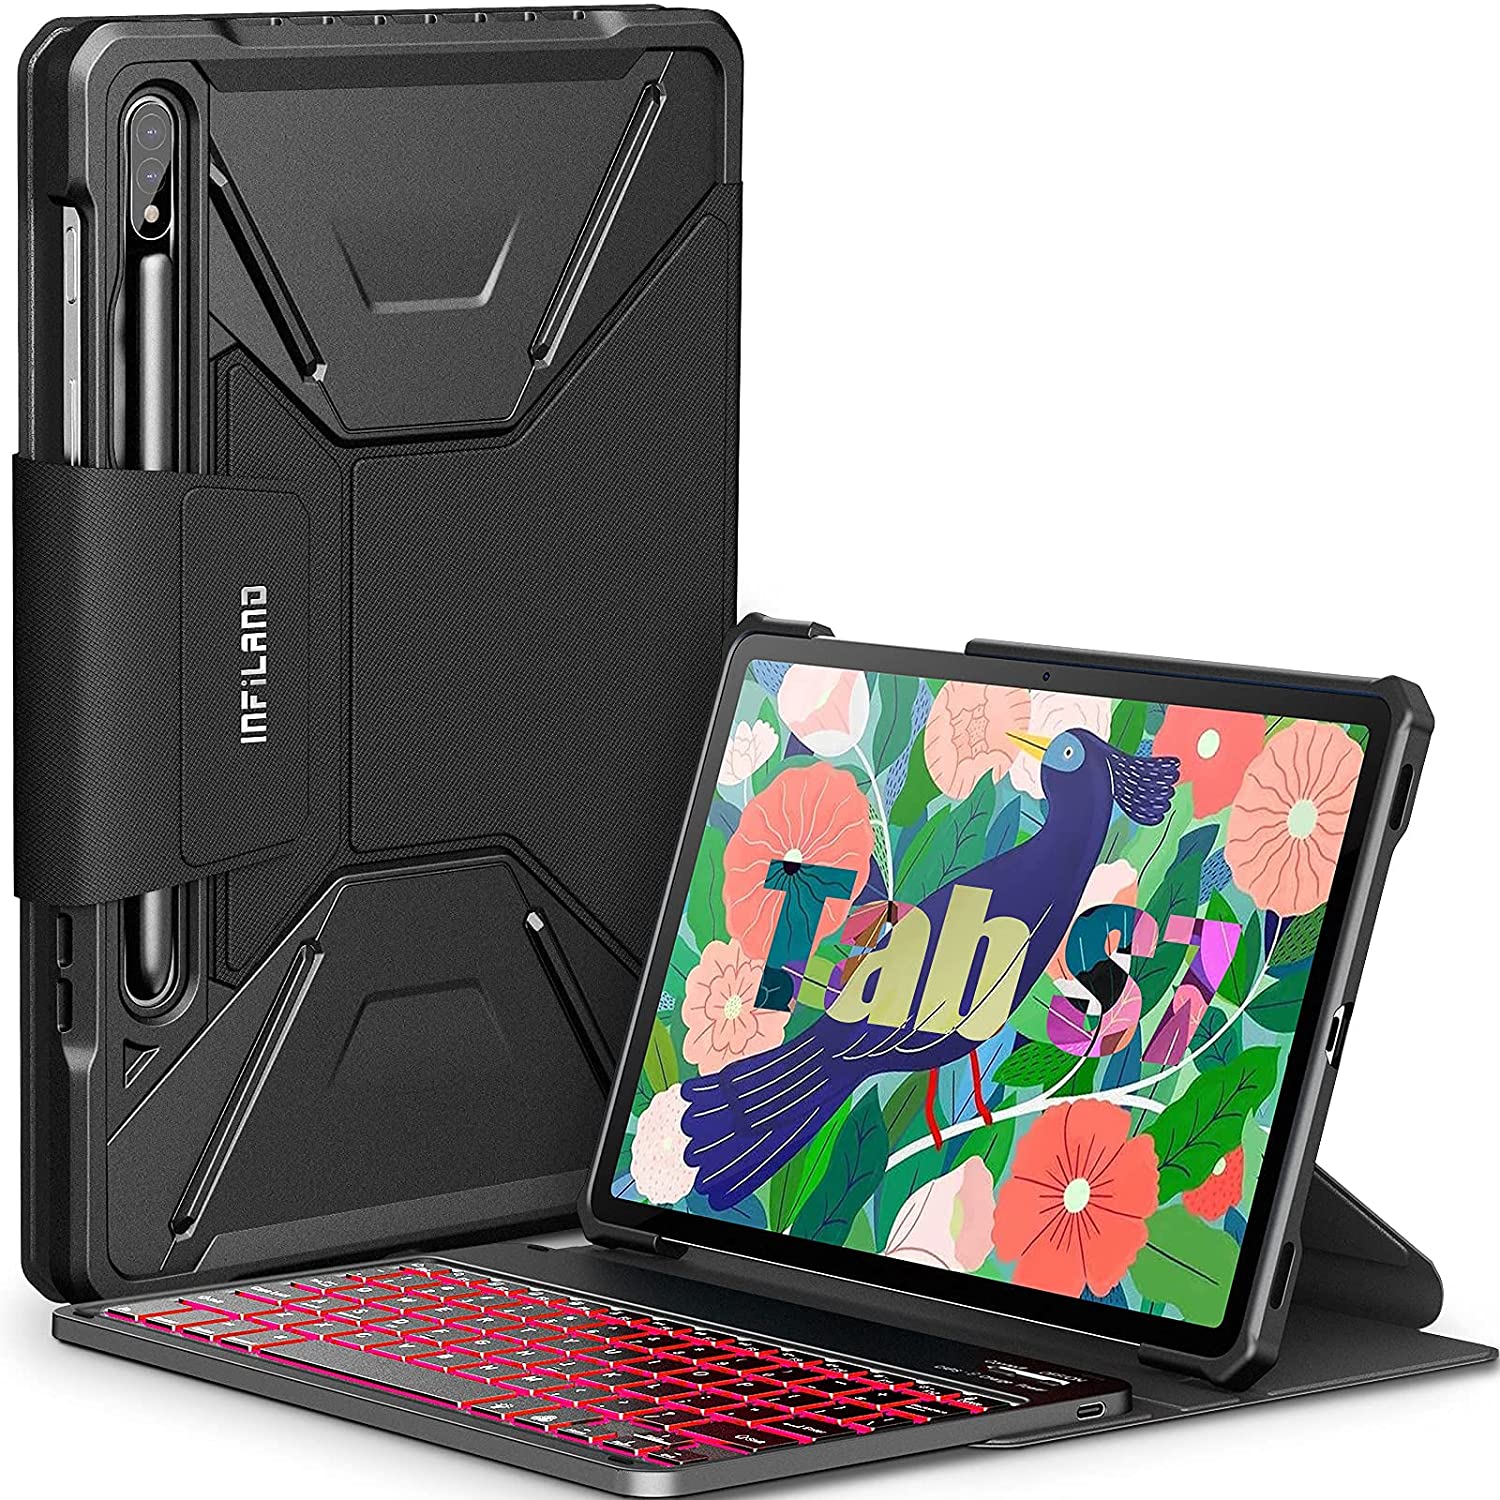 New Galaxy Tab S7 Case Bundle With Galaxy Tab S7 Backlit Keyboard Case (For Model Sm-T870/T875/T876 Tablet)